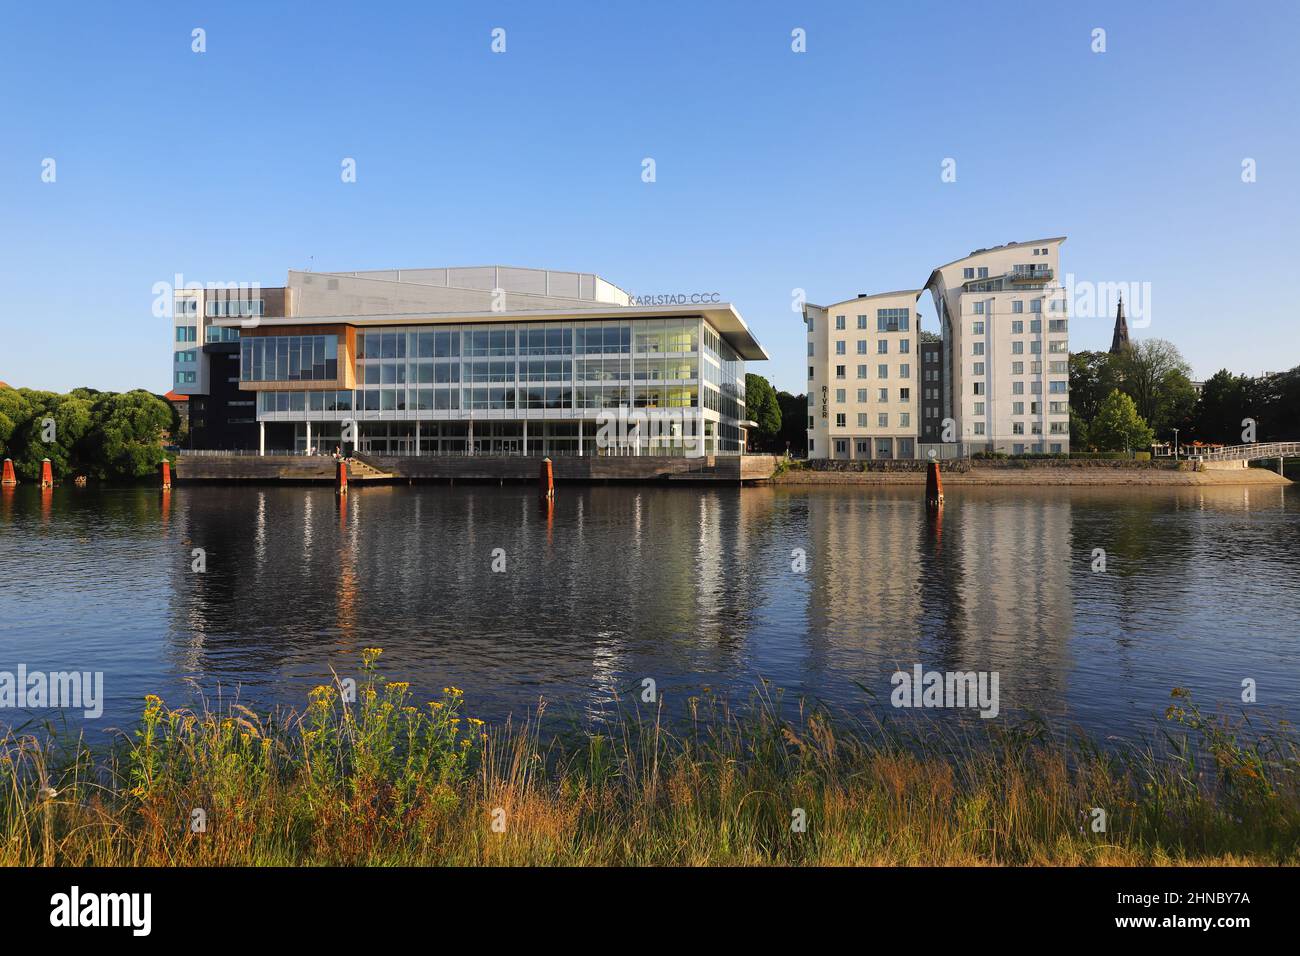 Karlstad, Sweden - July 16, 2021: Two canoeists on the Klaralven river in front of Karlstad CCC, conference, culture and congress center in Karlstad. Stock Photo